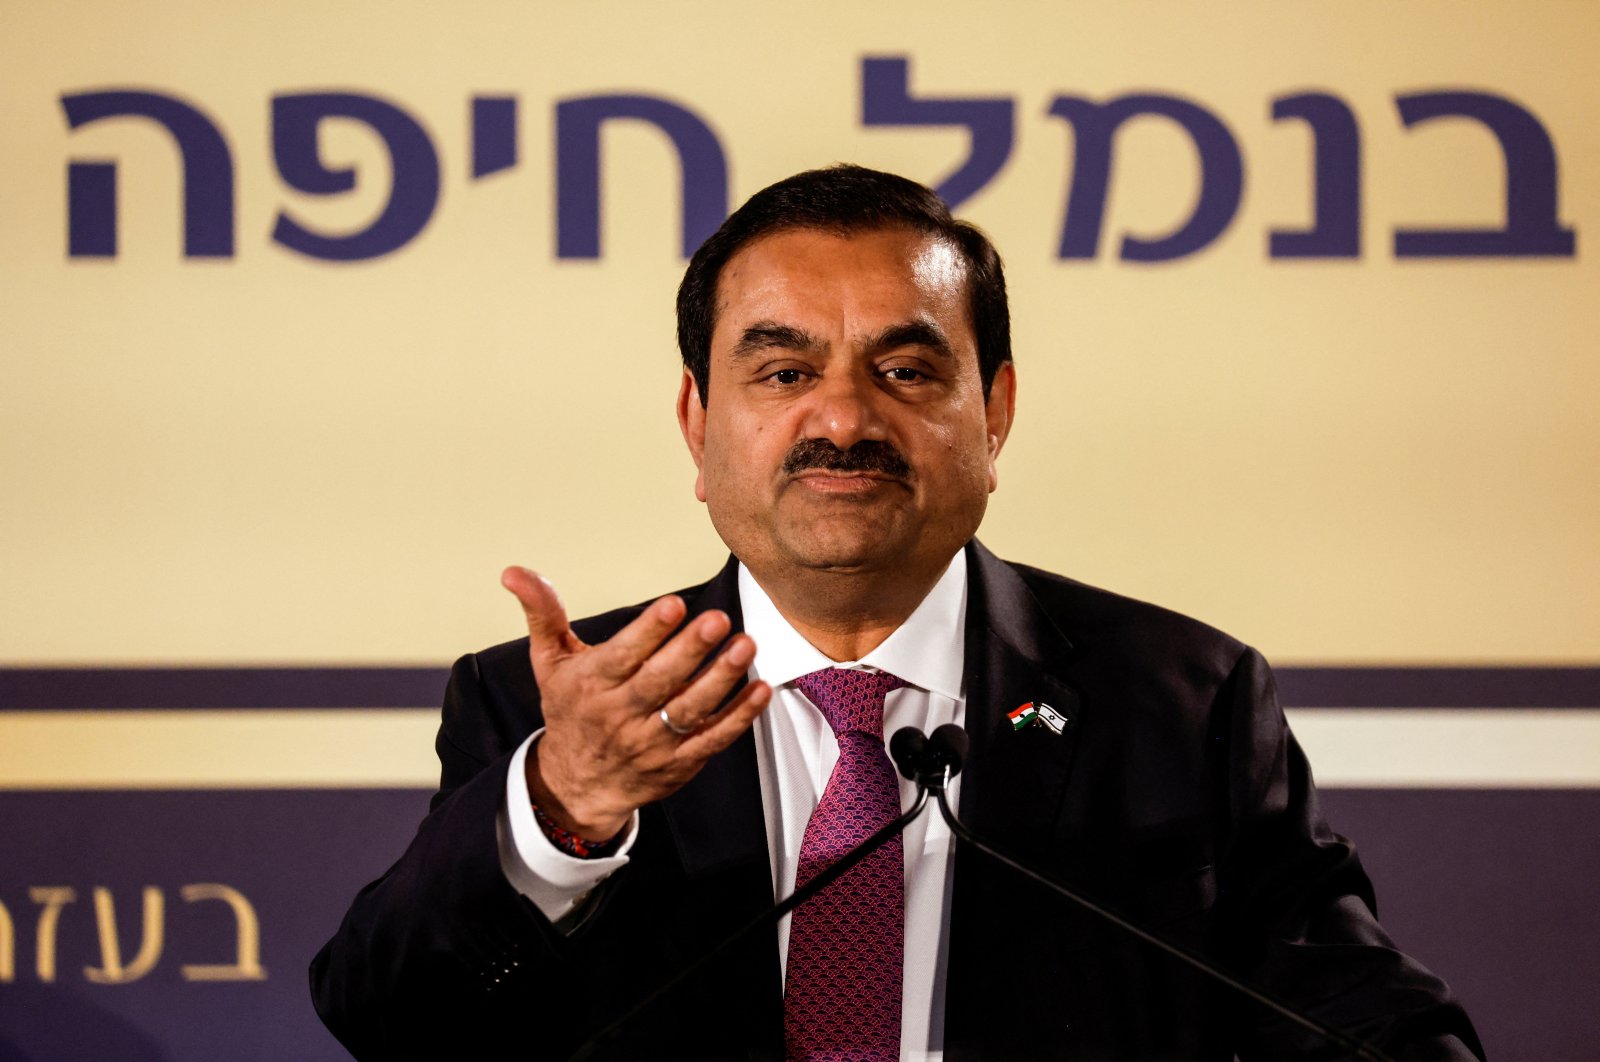 Indian billionaire Gautam Adani speaks during an inauguration ceremony after the Adani Group completed the purchase of Haifa Port, in Haifa, Israel, Jan. 31, 2023. (Reuters Photo)